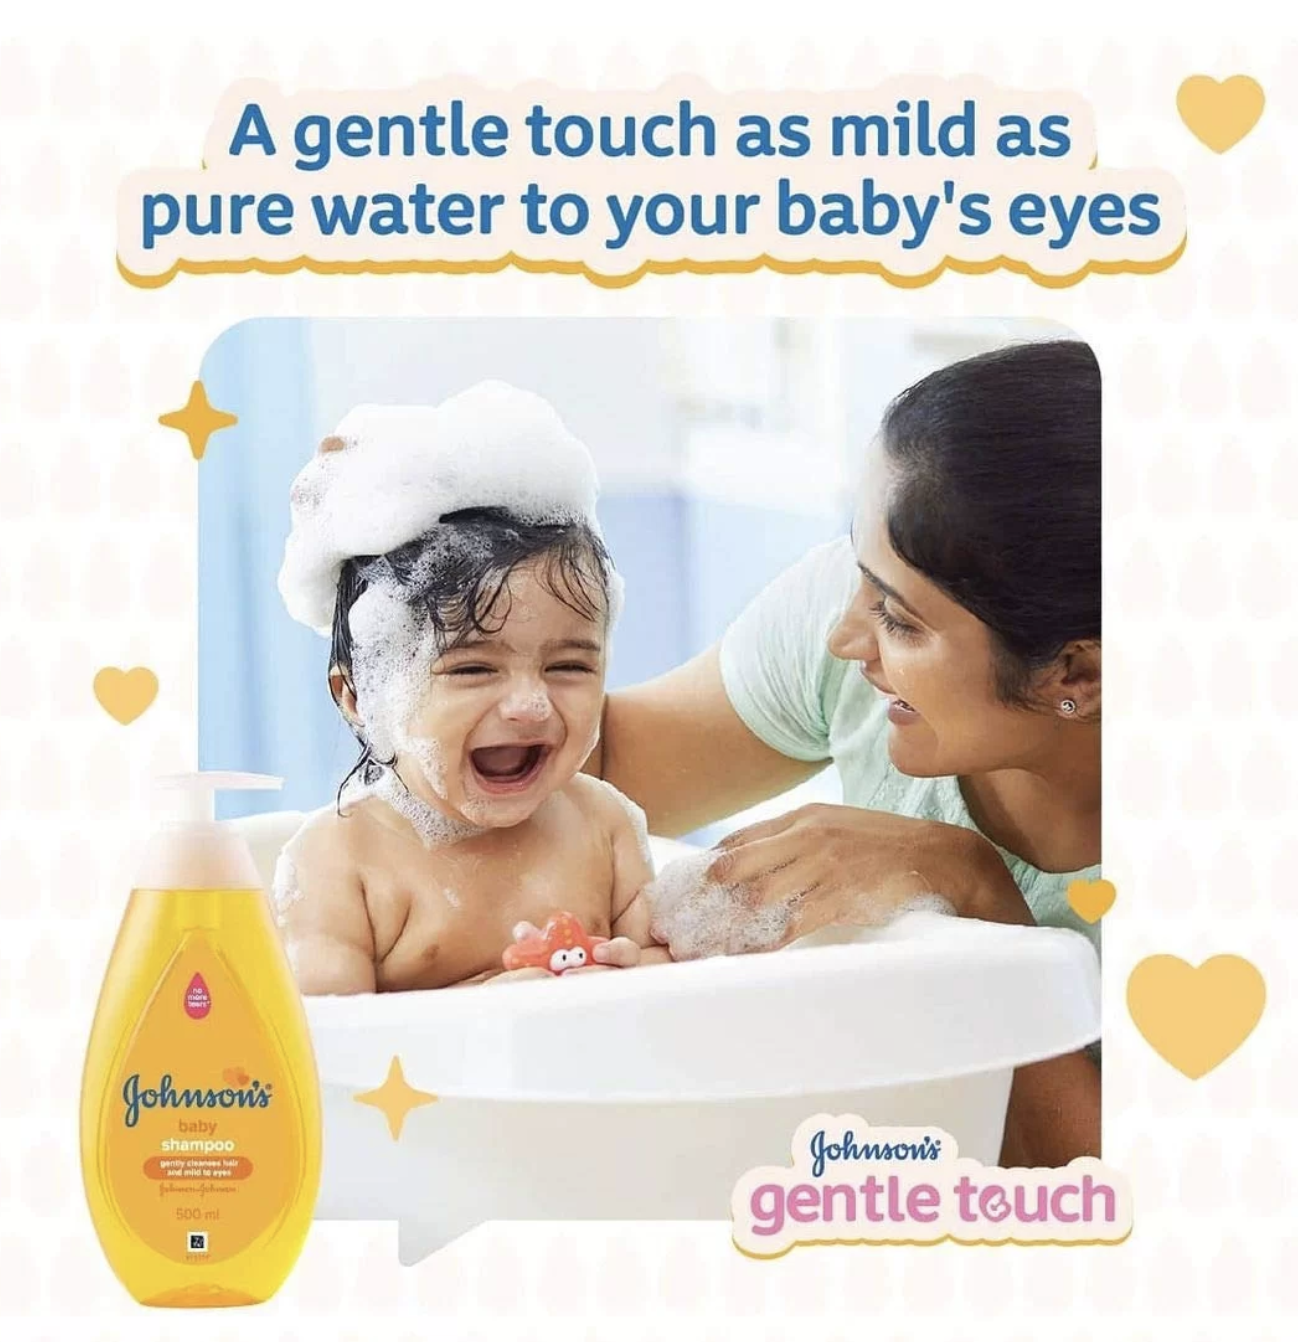 Johnson & Johnson uses brushed  babe  images successful  their merchandise  content